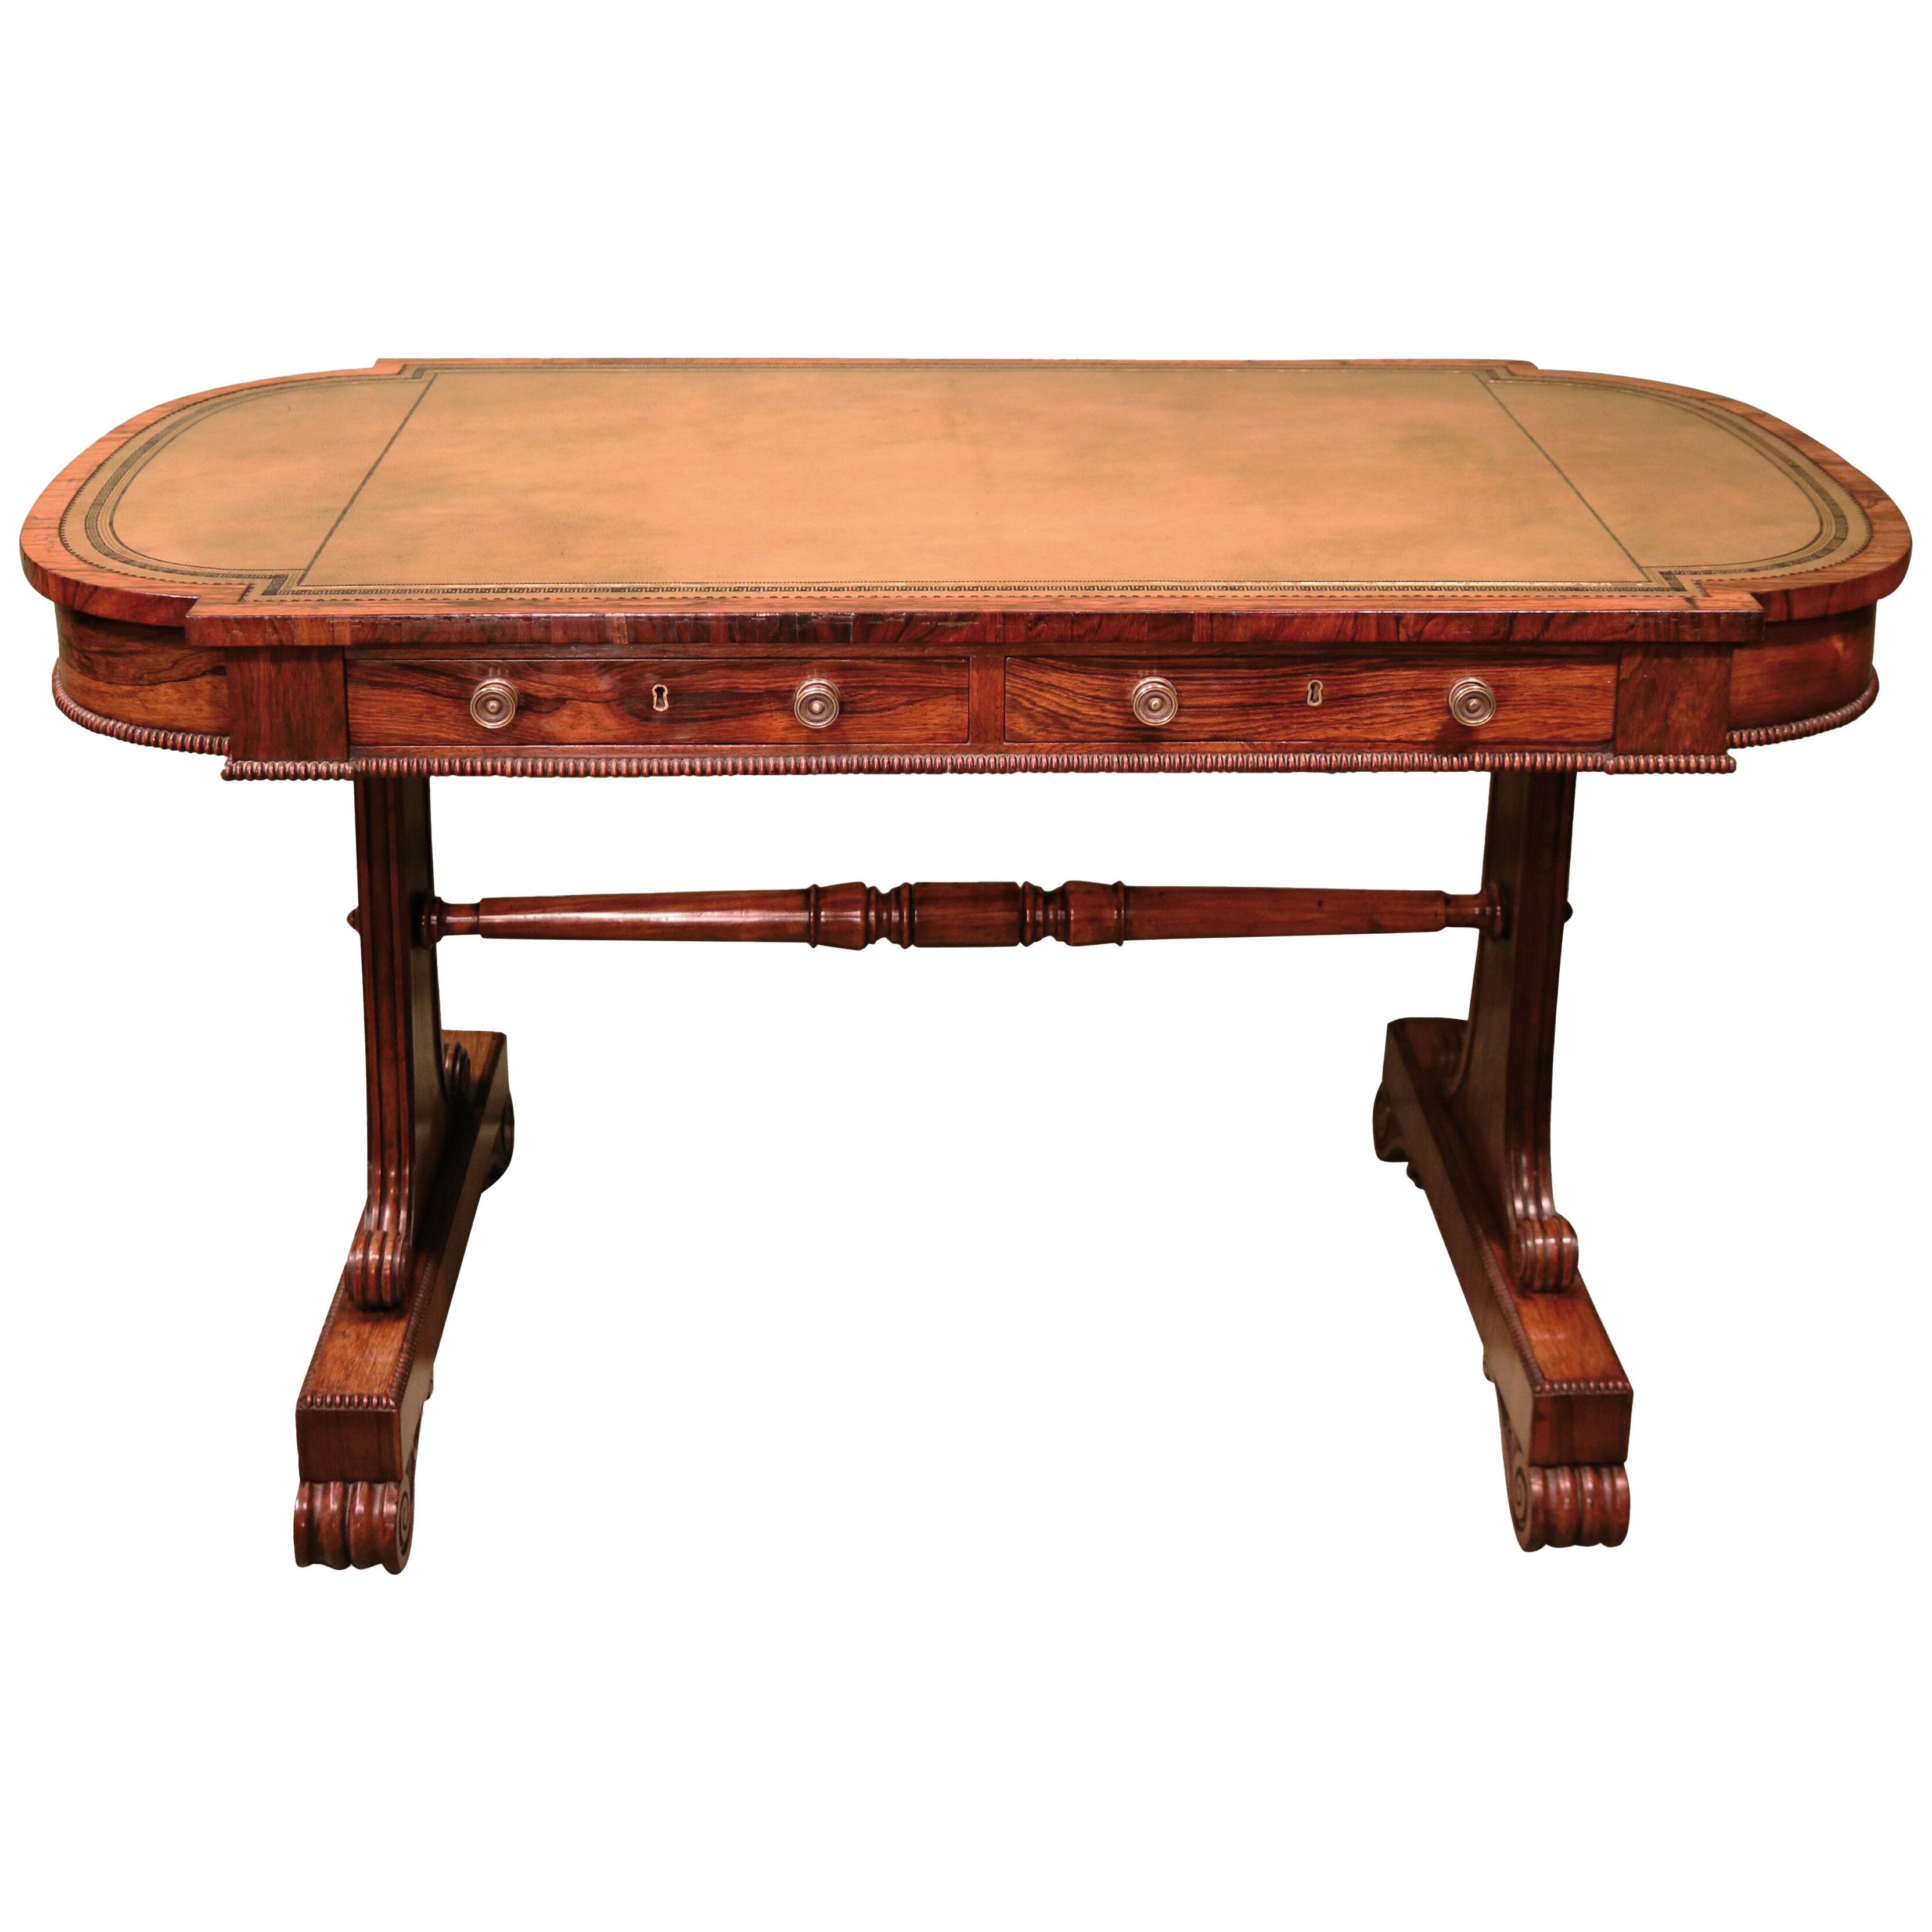 An eraly 19th century Regency period rosewood writing table